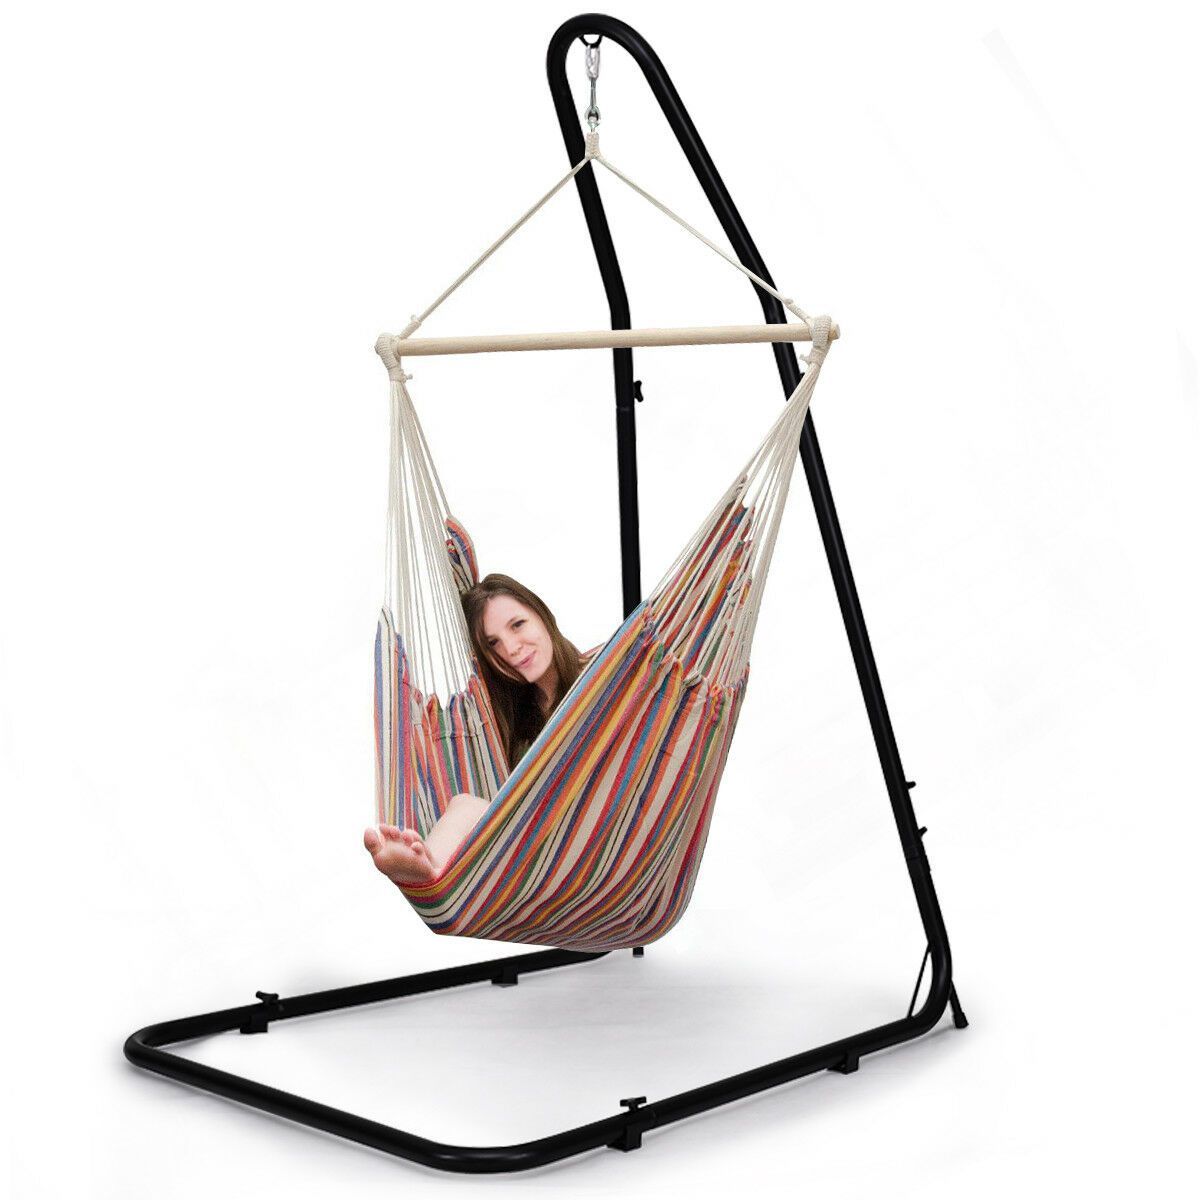 How To Build A Hammock Chair Stand